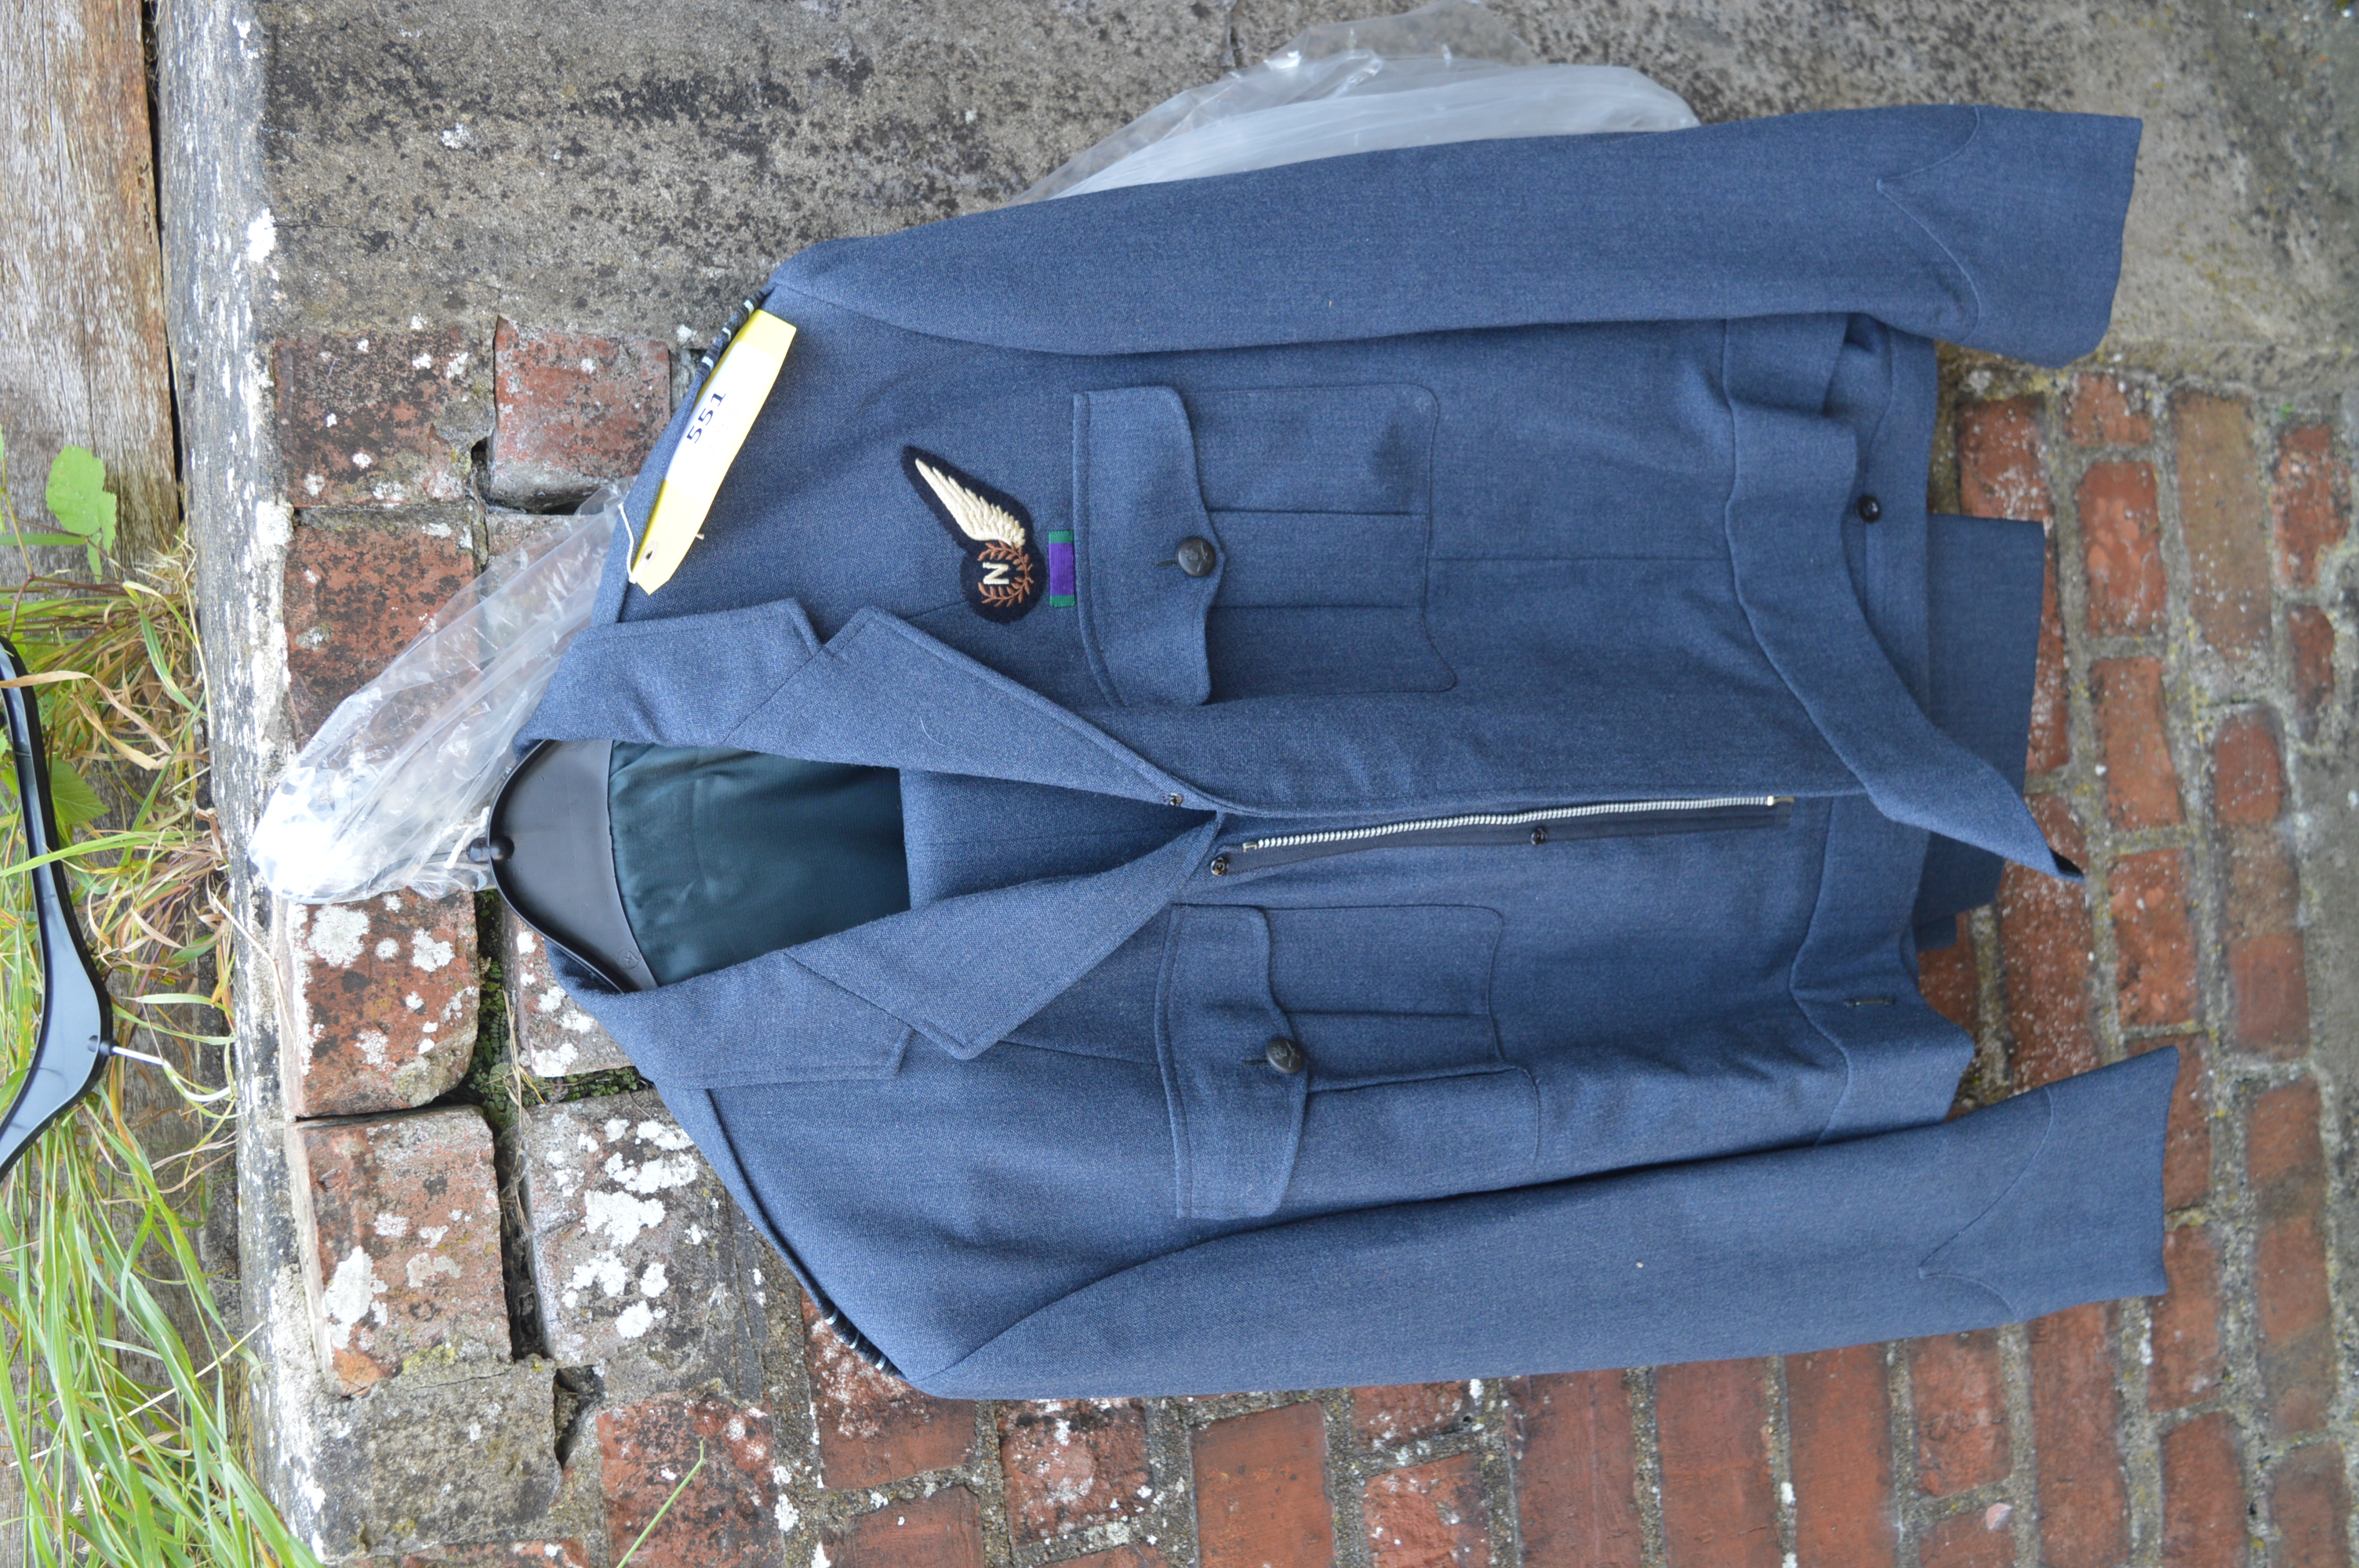 RAF Battle Dress Type Jacket and Trousers - Made in Singapore